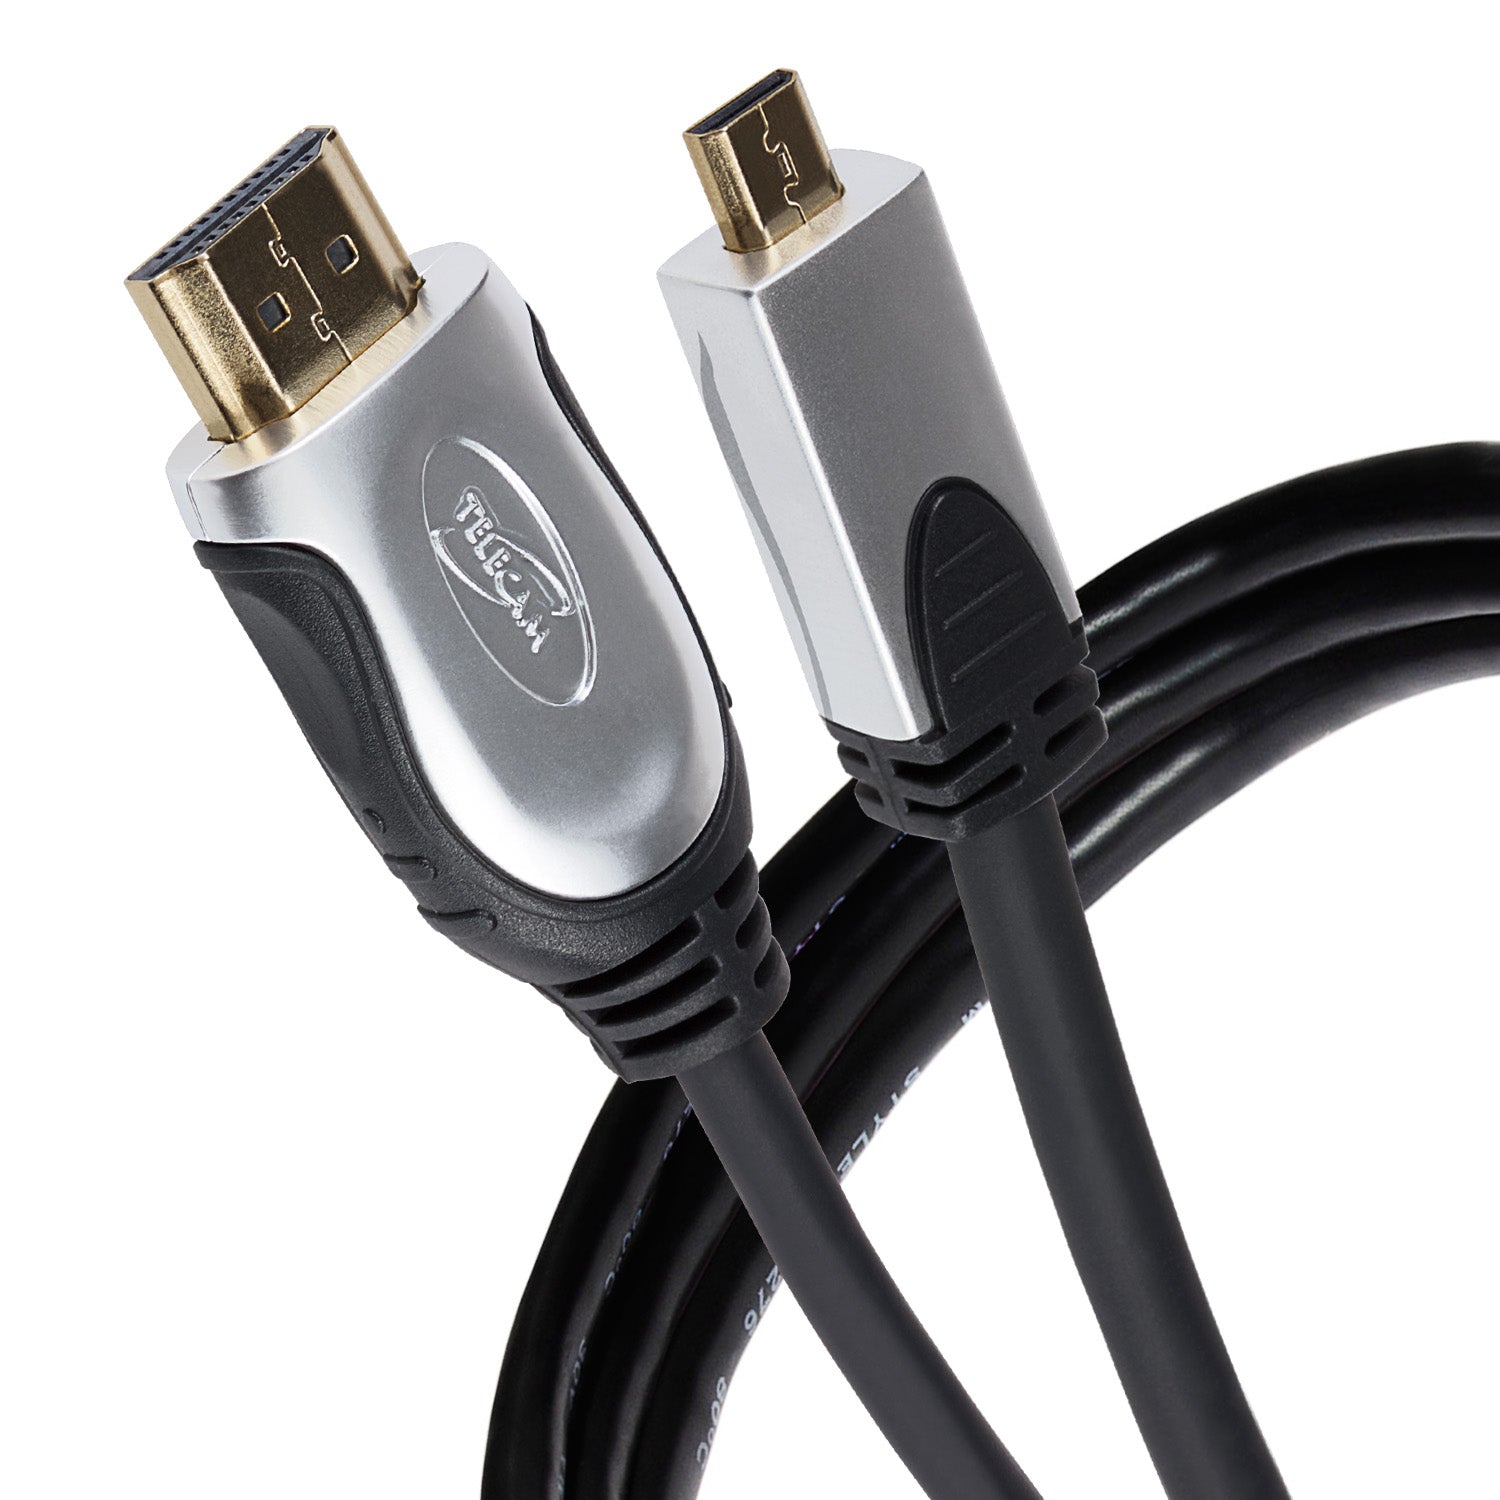 HDMI Pro Cable (3m)  Best of British Audio Electronics